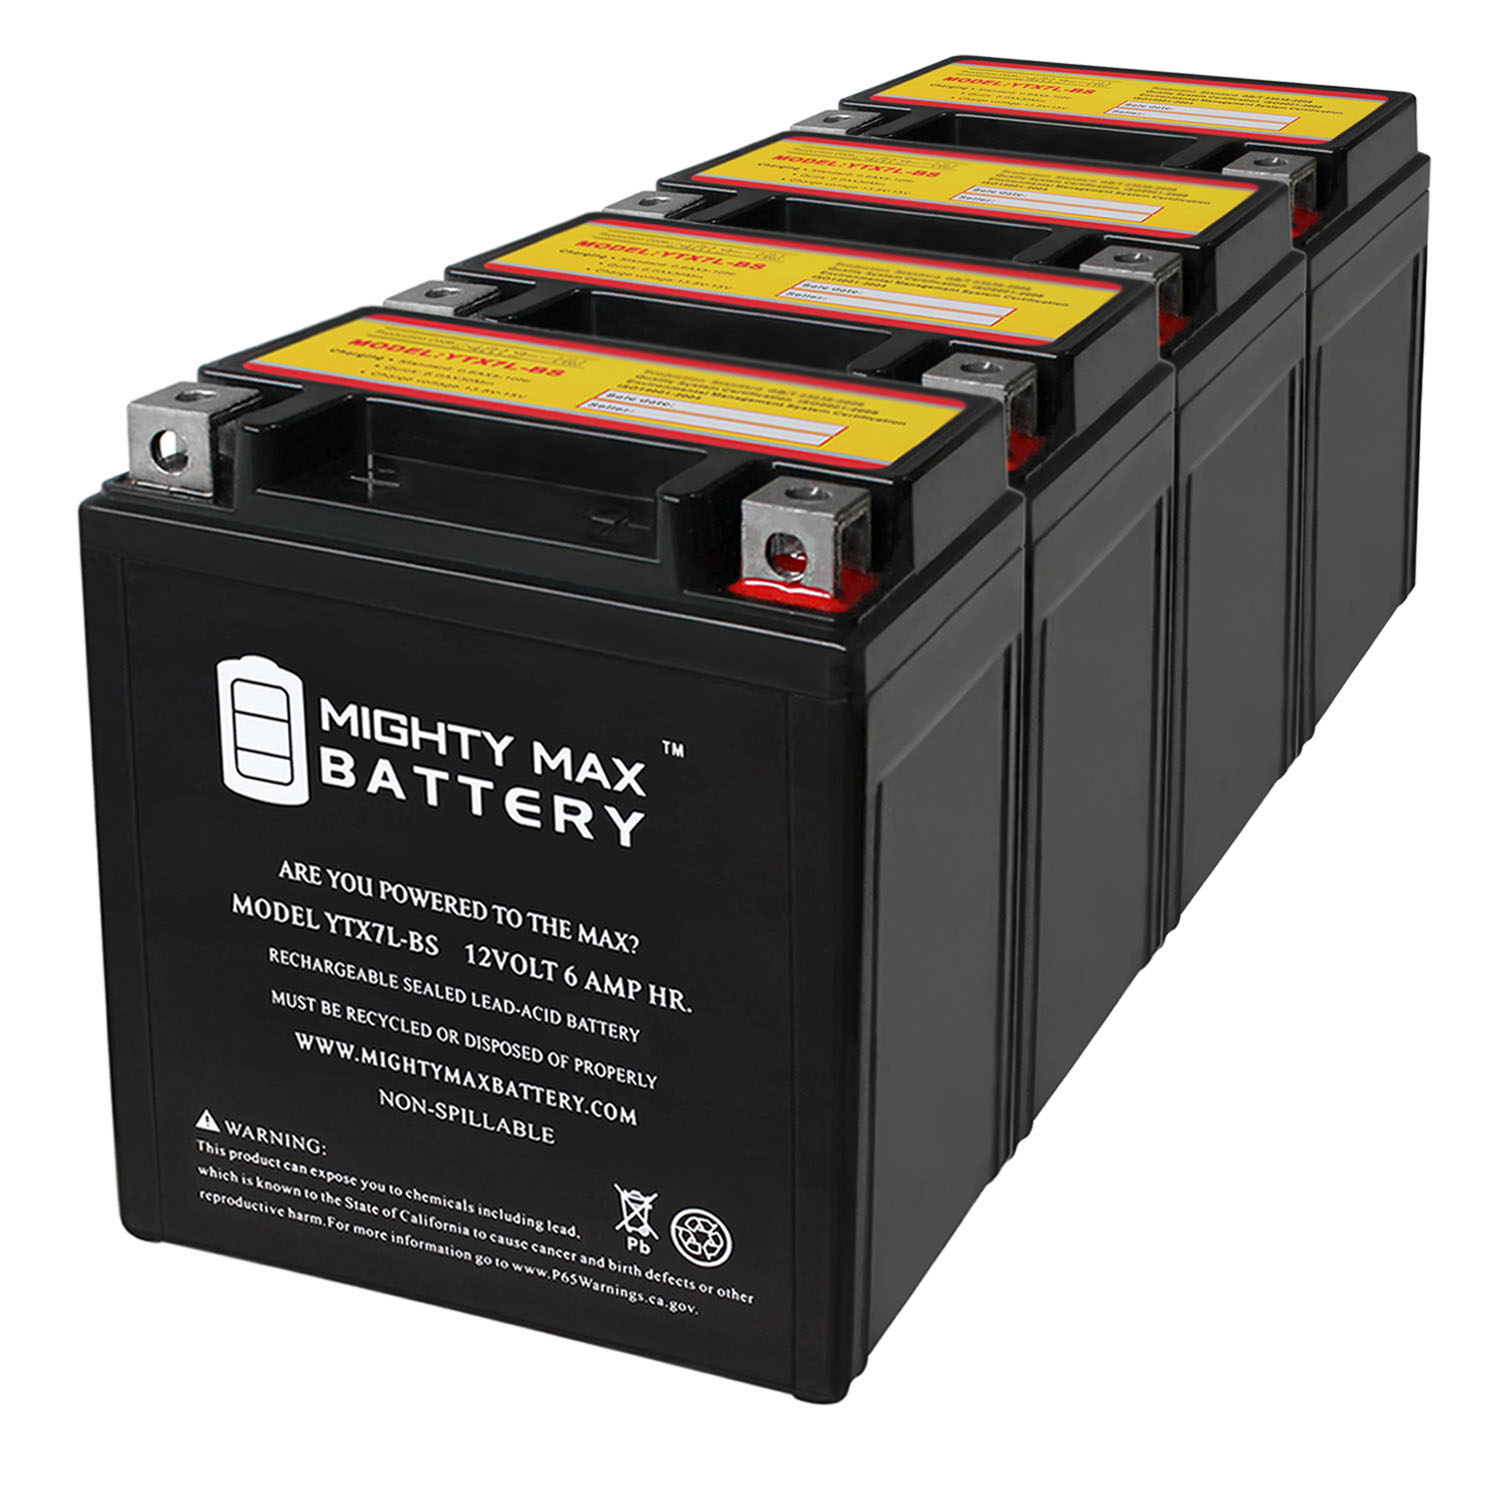 YTX7L-BS 12v 6Ah Replacement Battery compatible with KTM 125 Duke 2013 - 4 Pack